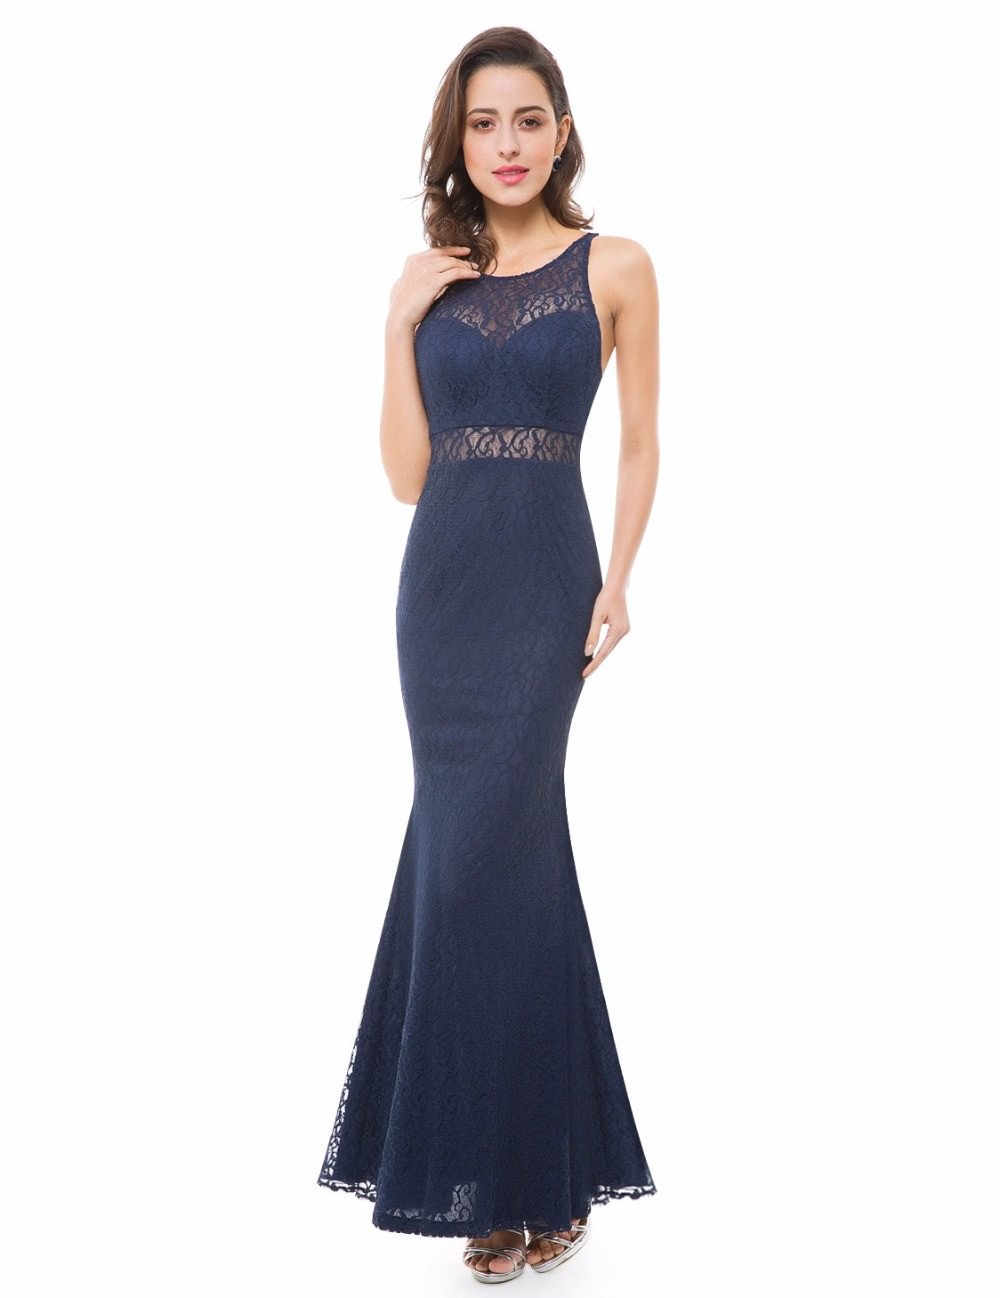 Gorgeous Navy Lace Dresses Mermaid Long Evening Party Gowns - lulusllly